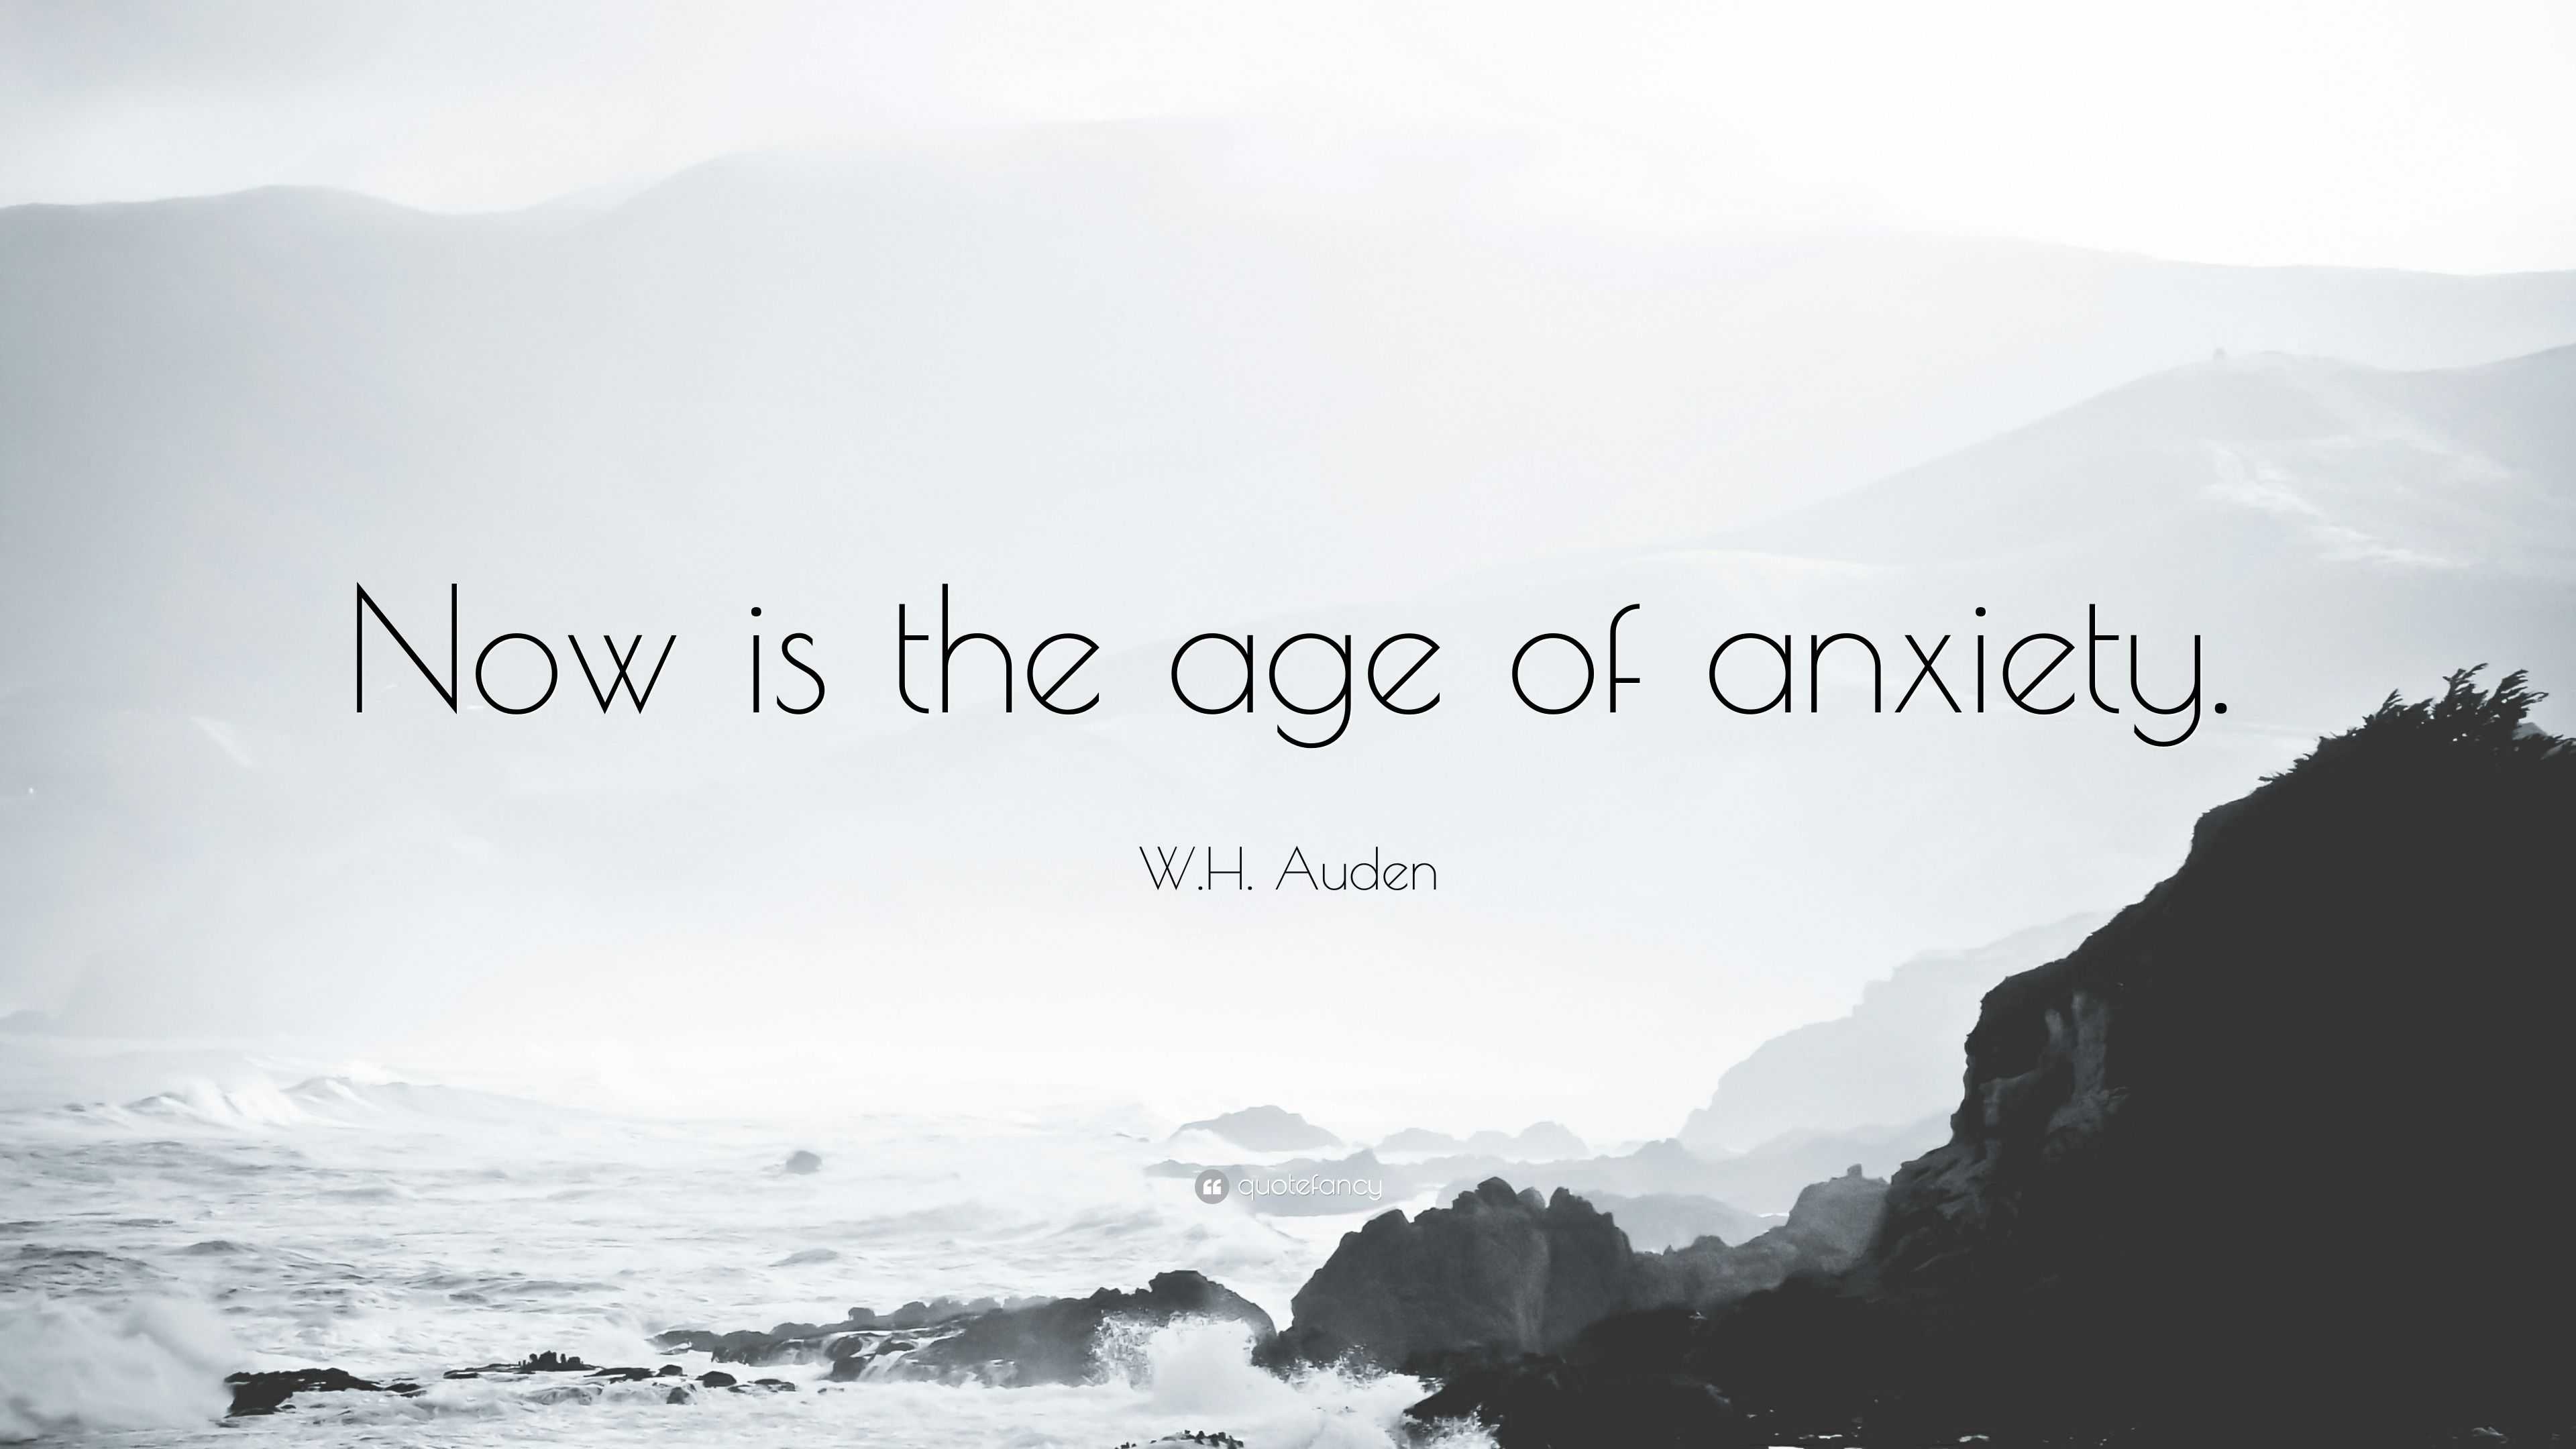 wh auden age of anxiety